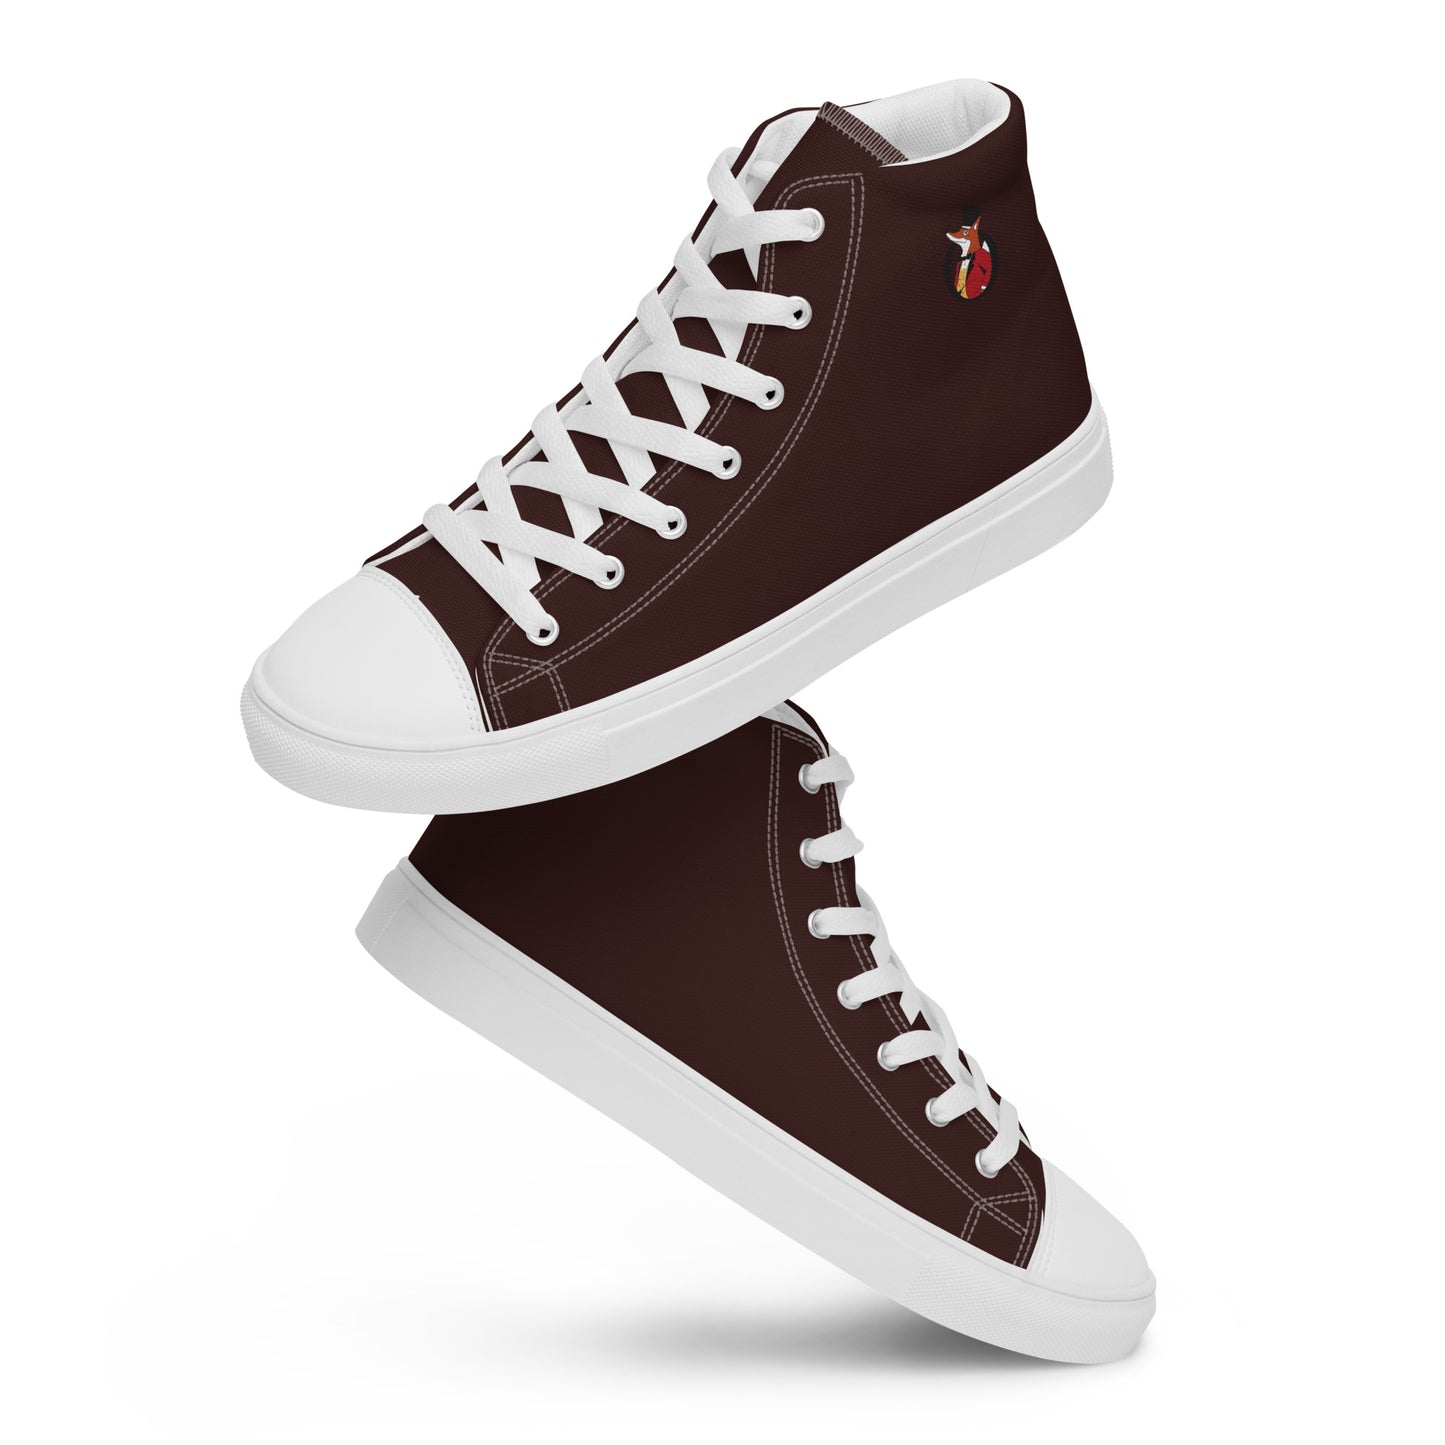 Snooty Fox Art Women’s High Top Canvas Shoes - Impala Brown